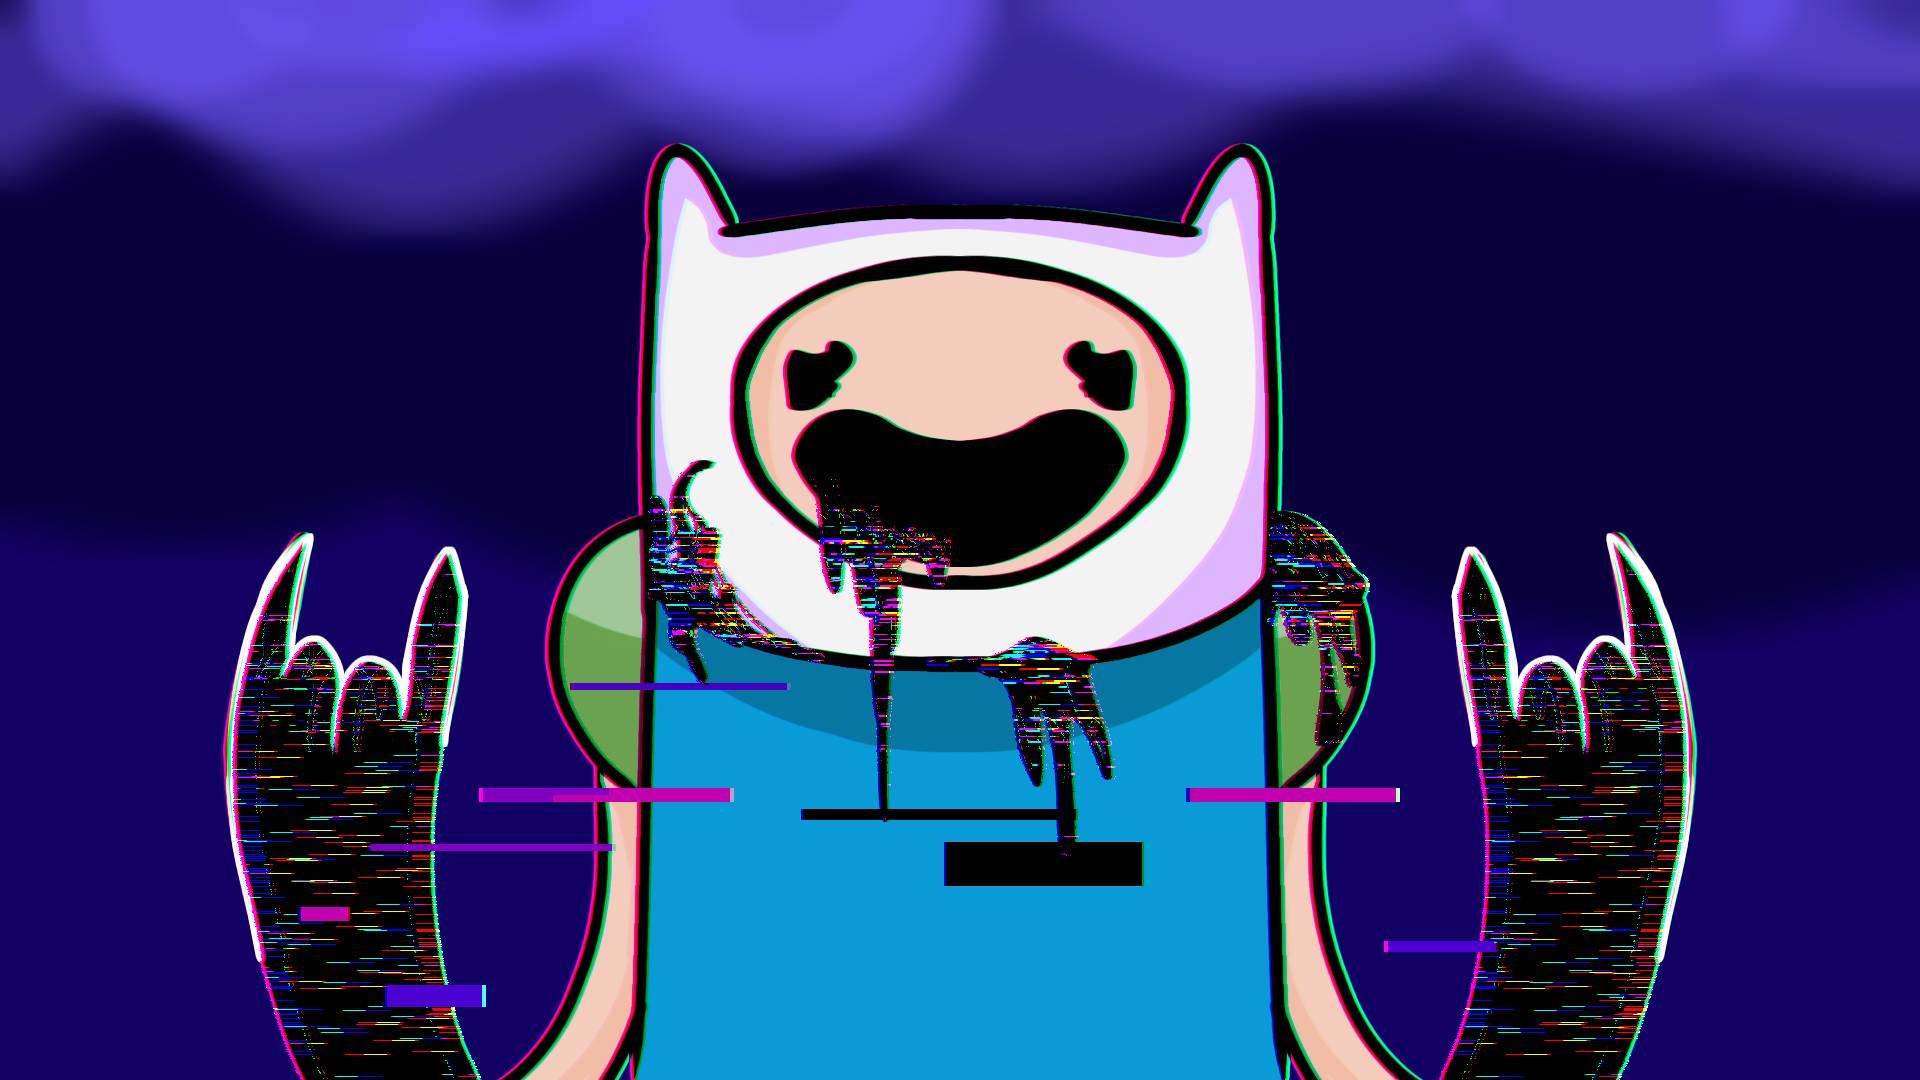 Pibby Finn by IcyDarkFlame on DeviantArt